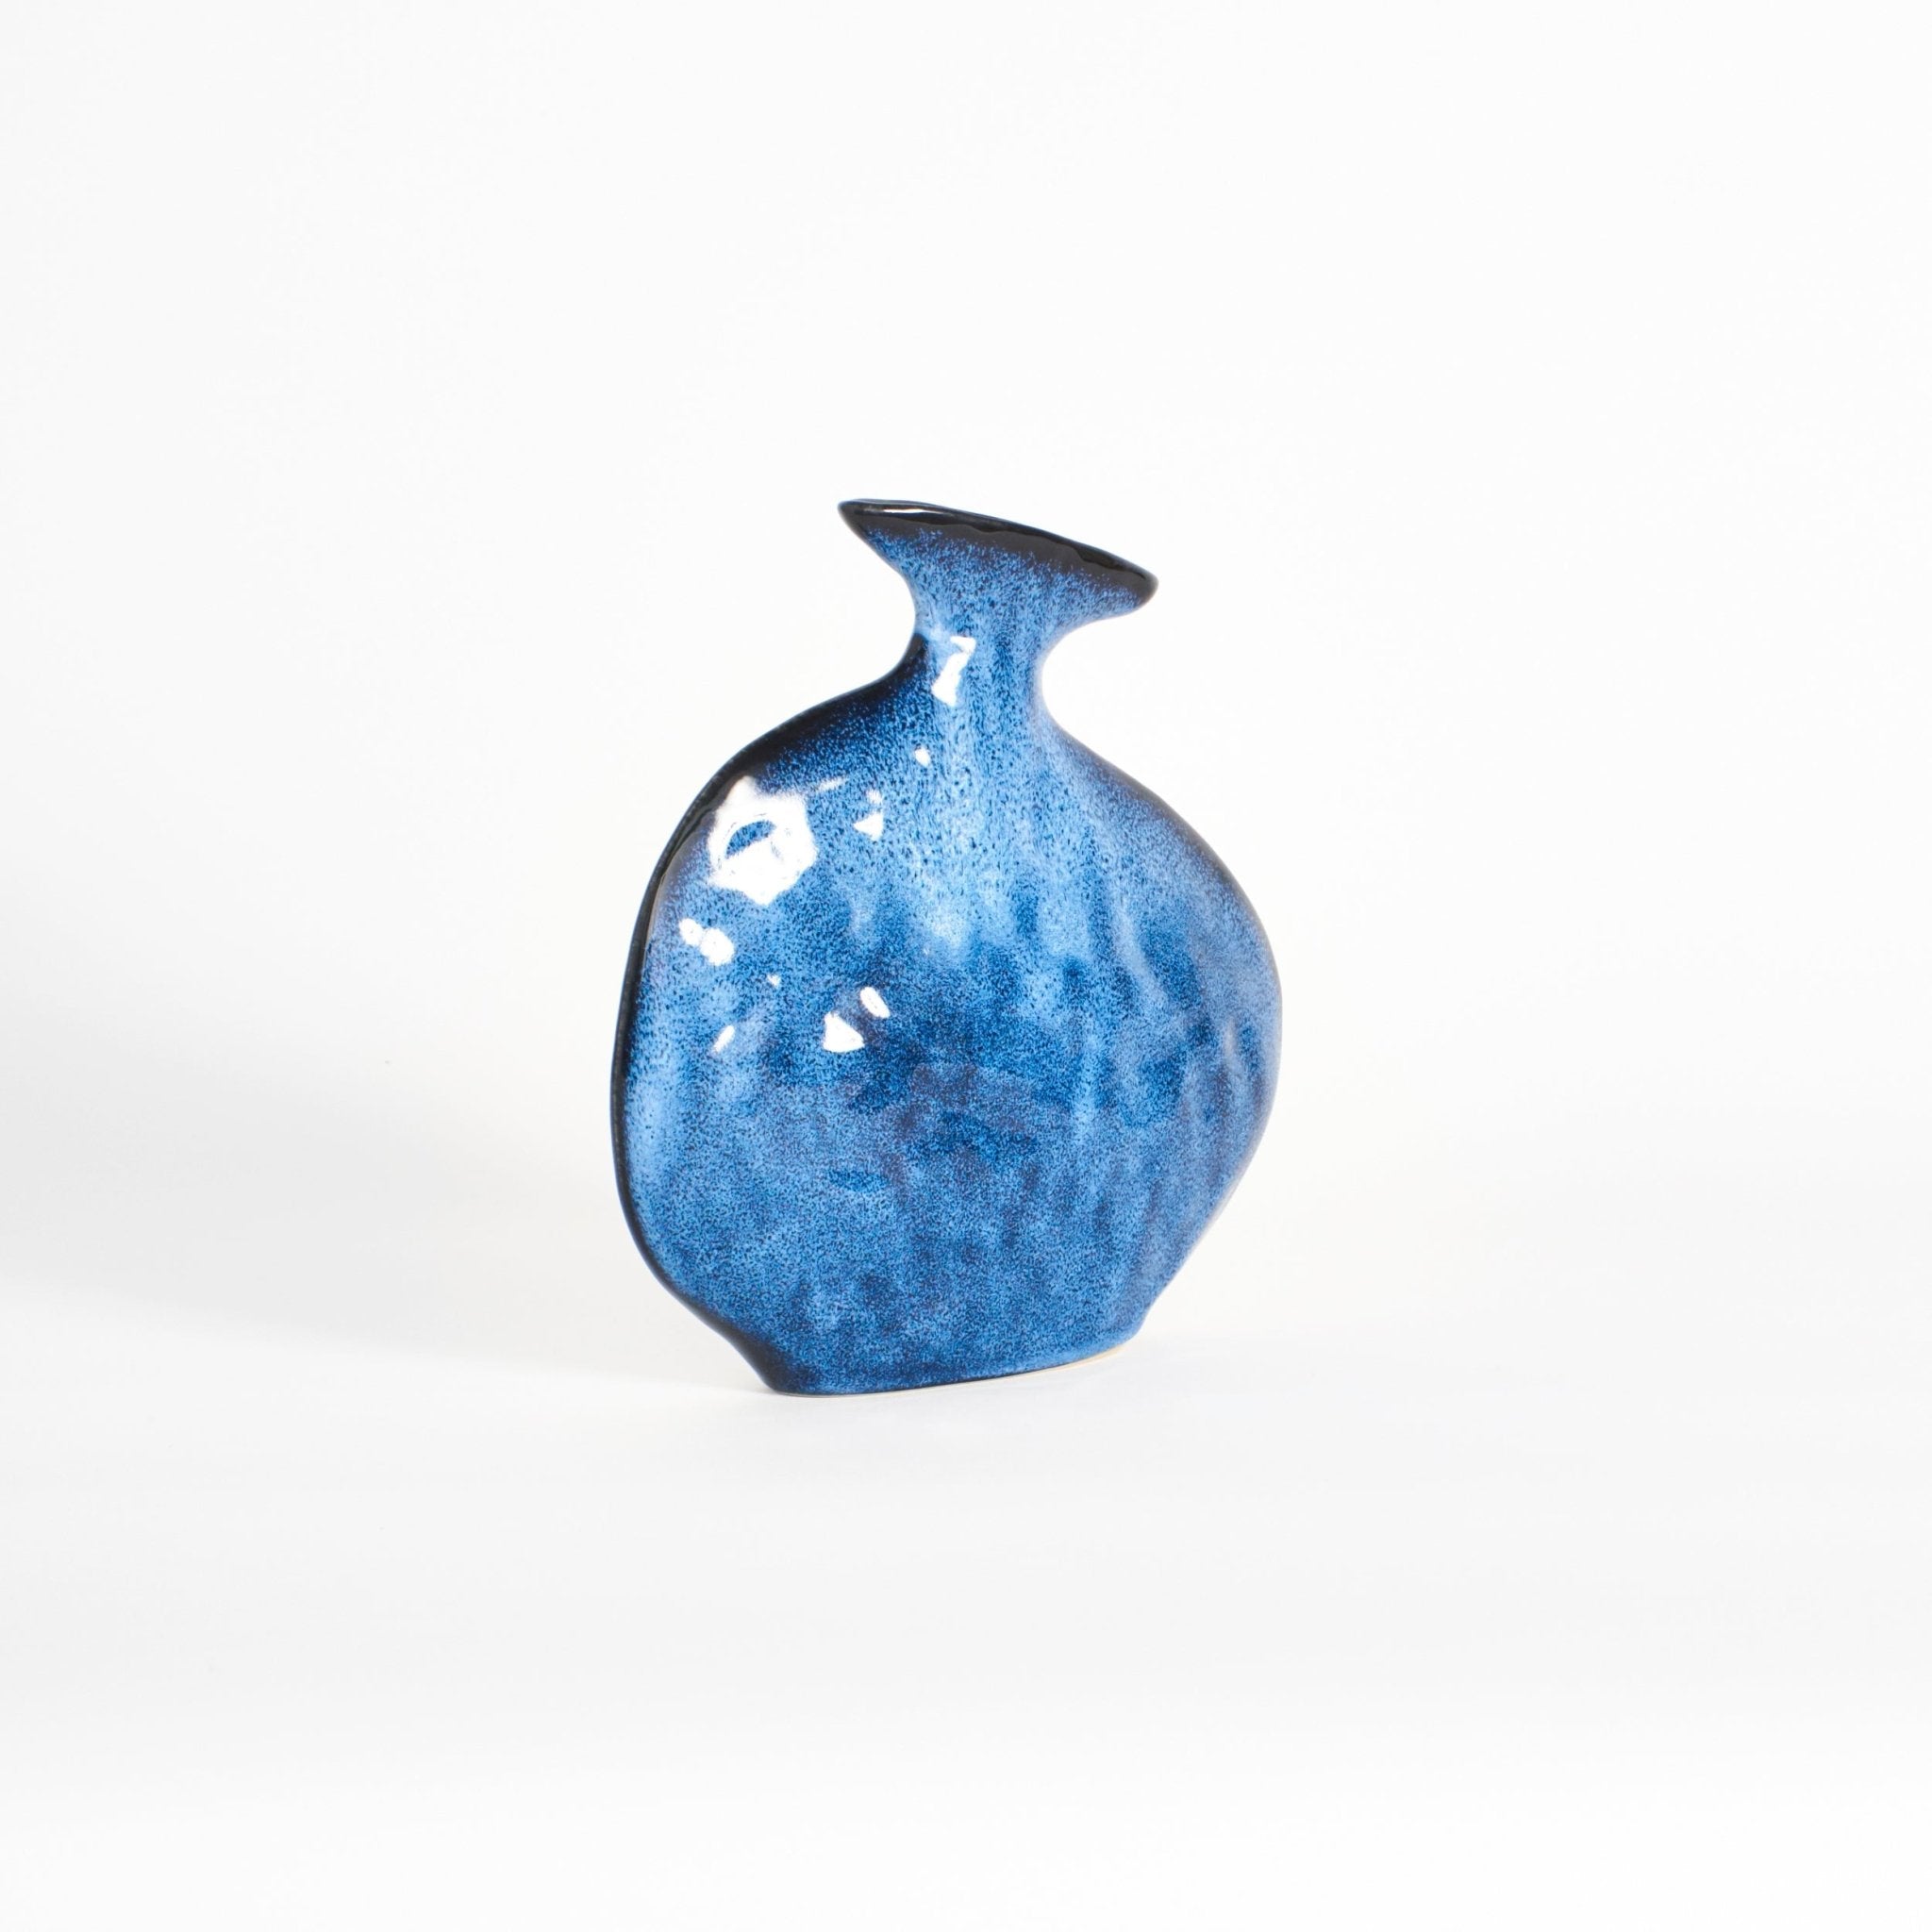 Flat Vase - Midnight blue vase by Project 213A